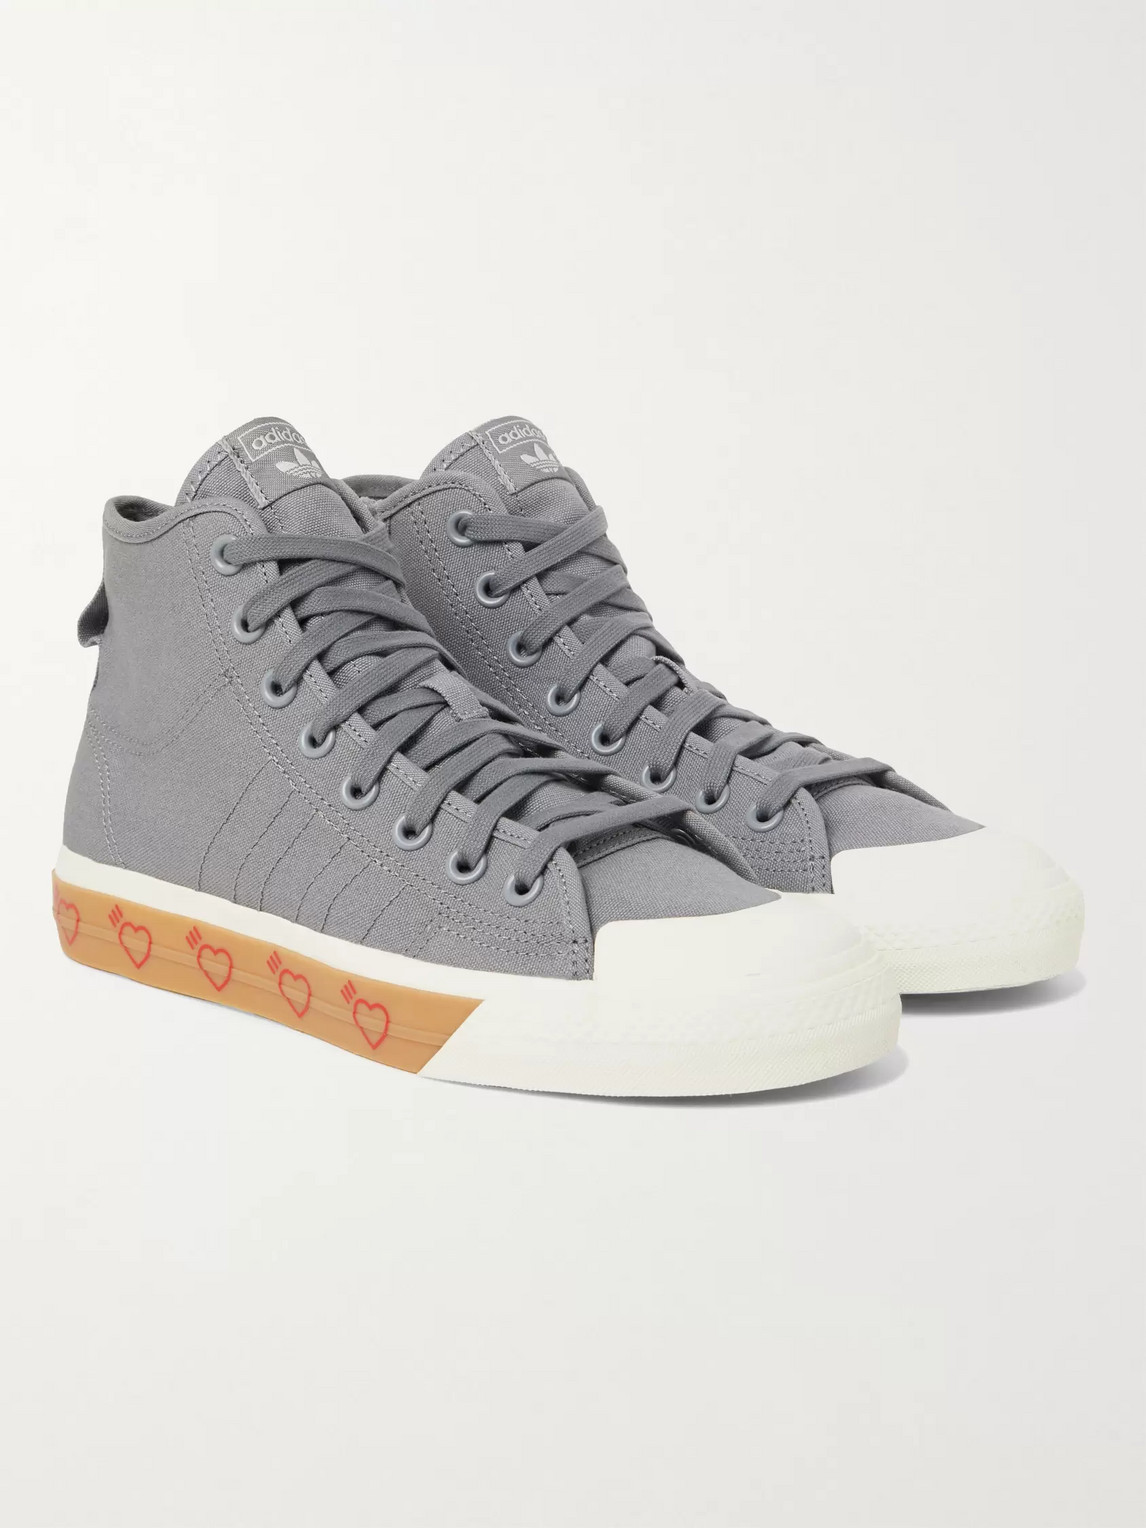 Adidas Consortium Human Made Nizza Canvas High-top Trainers In Grey